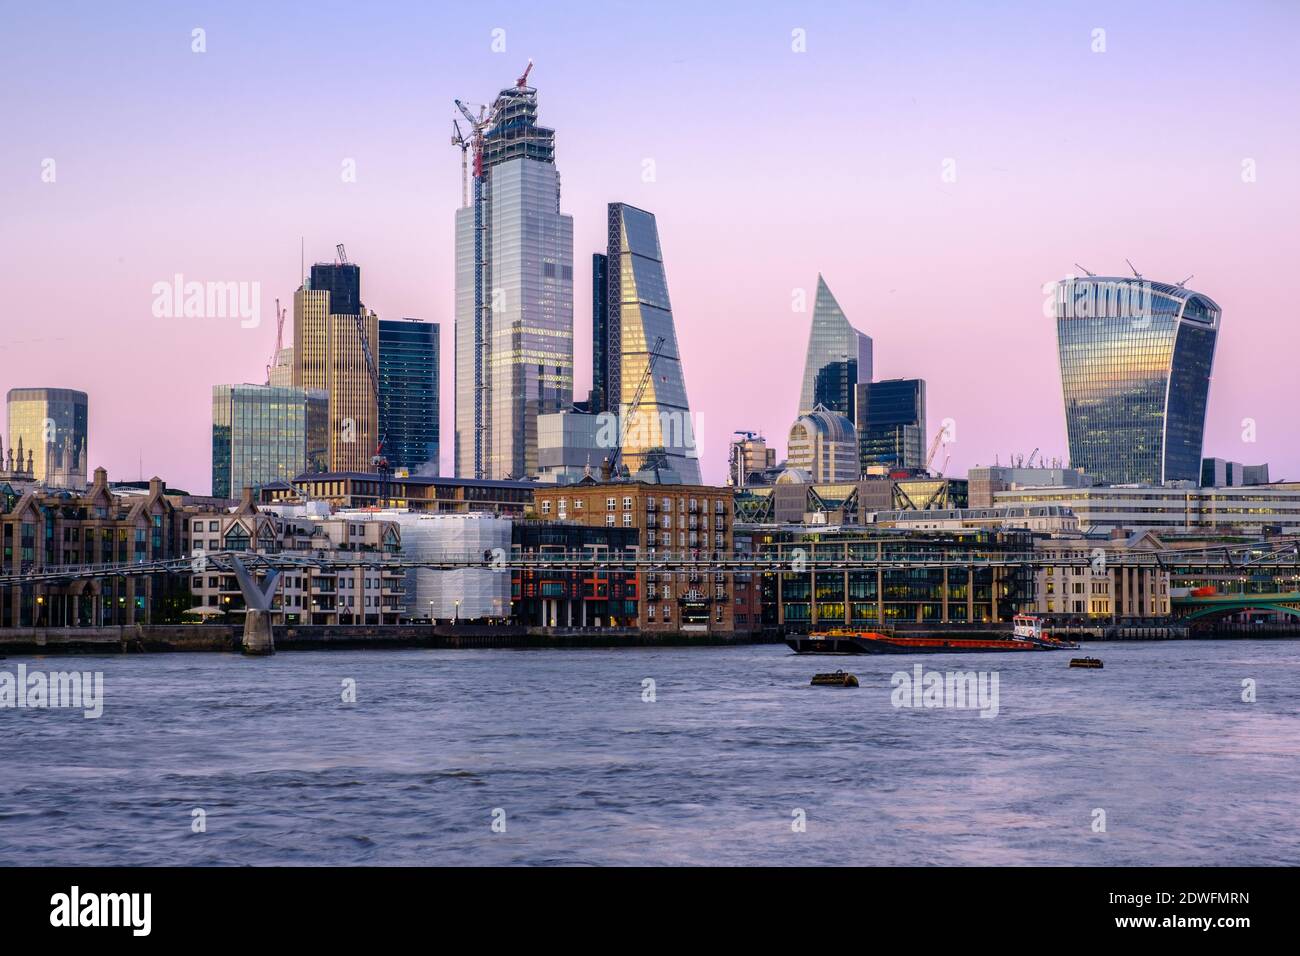 London city centre and its buildings during a pink sunset in a clear sky Stock Photo